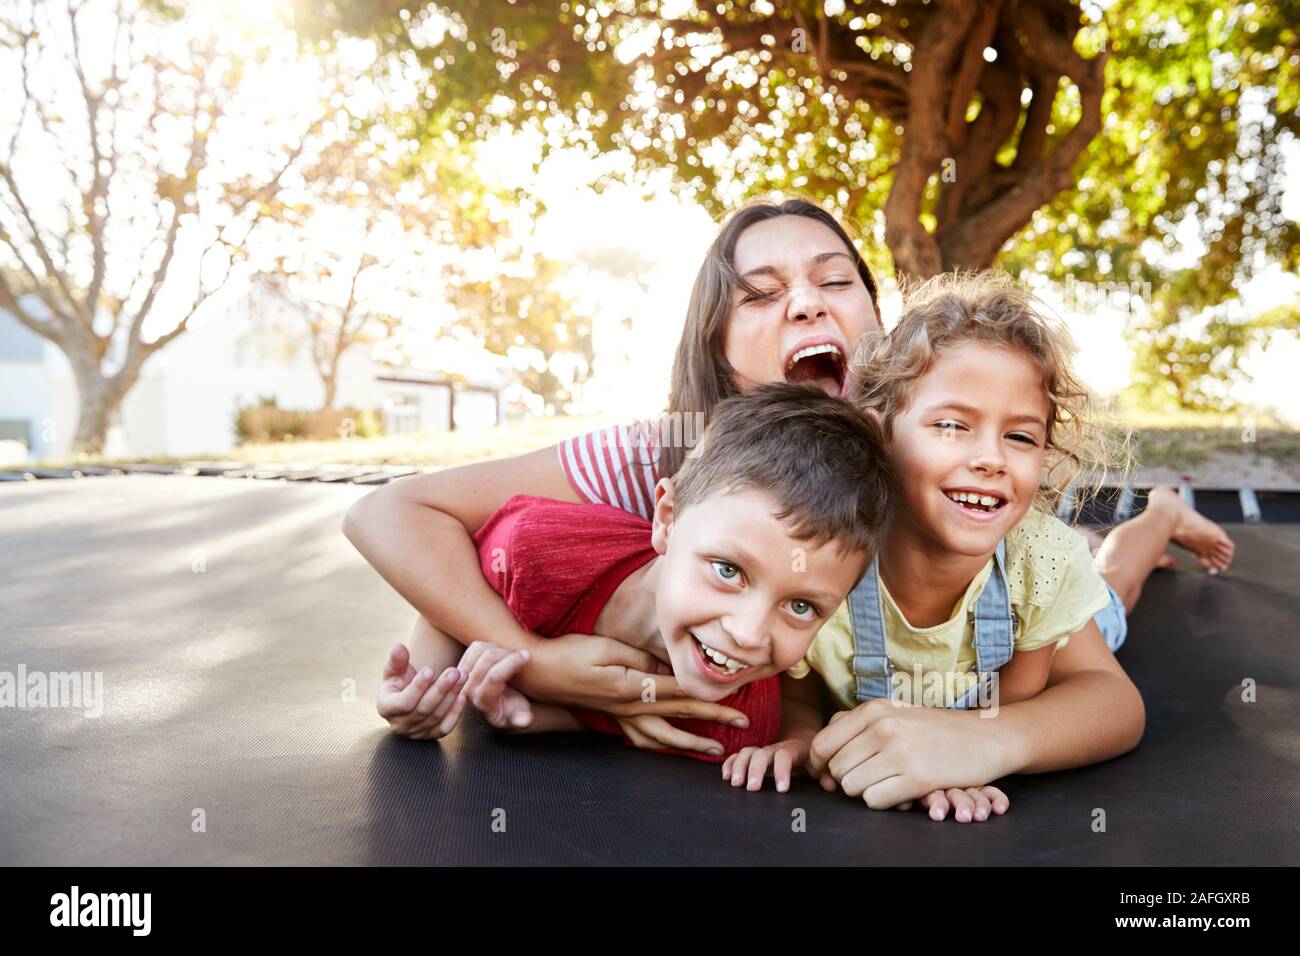 Portrait Of Siblings With Teenage Sister Playing On Outdoor Trampoline In Garden Stock Photo